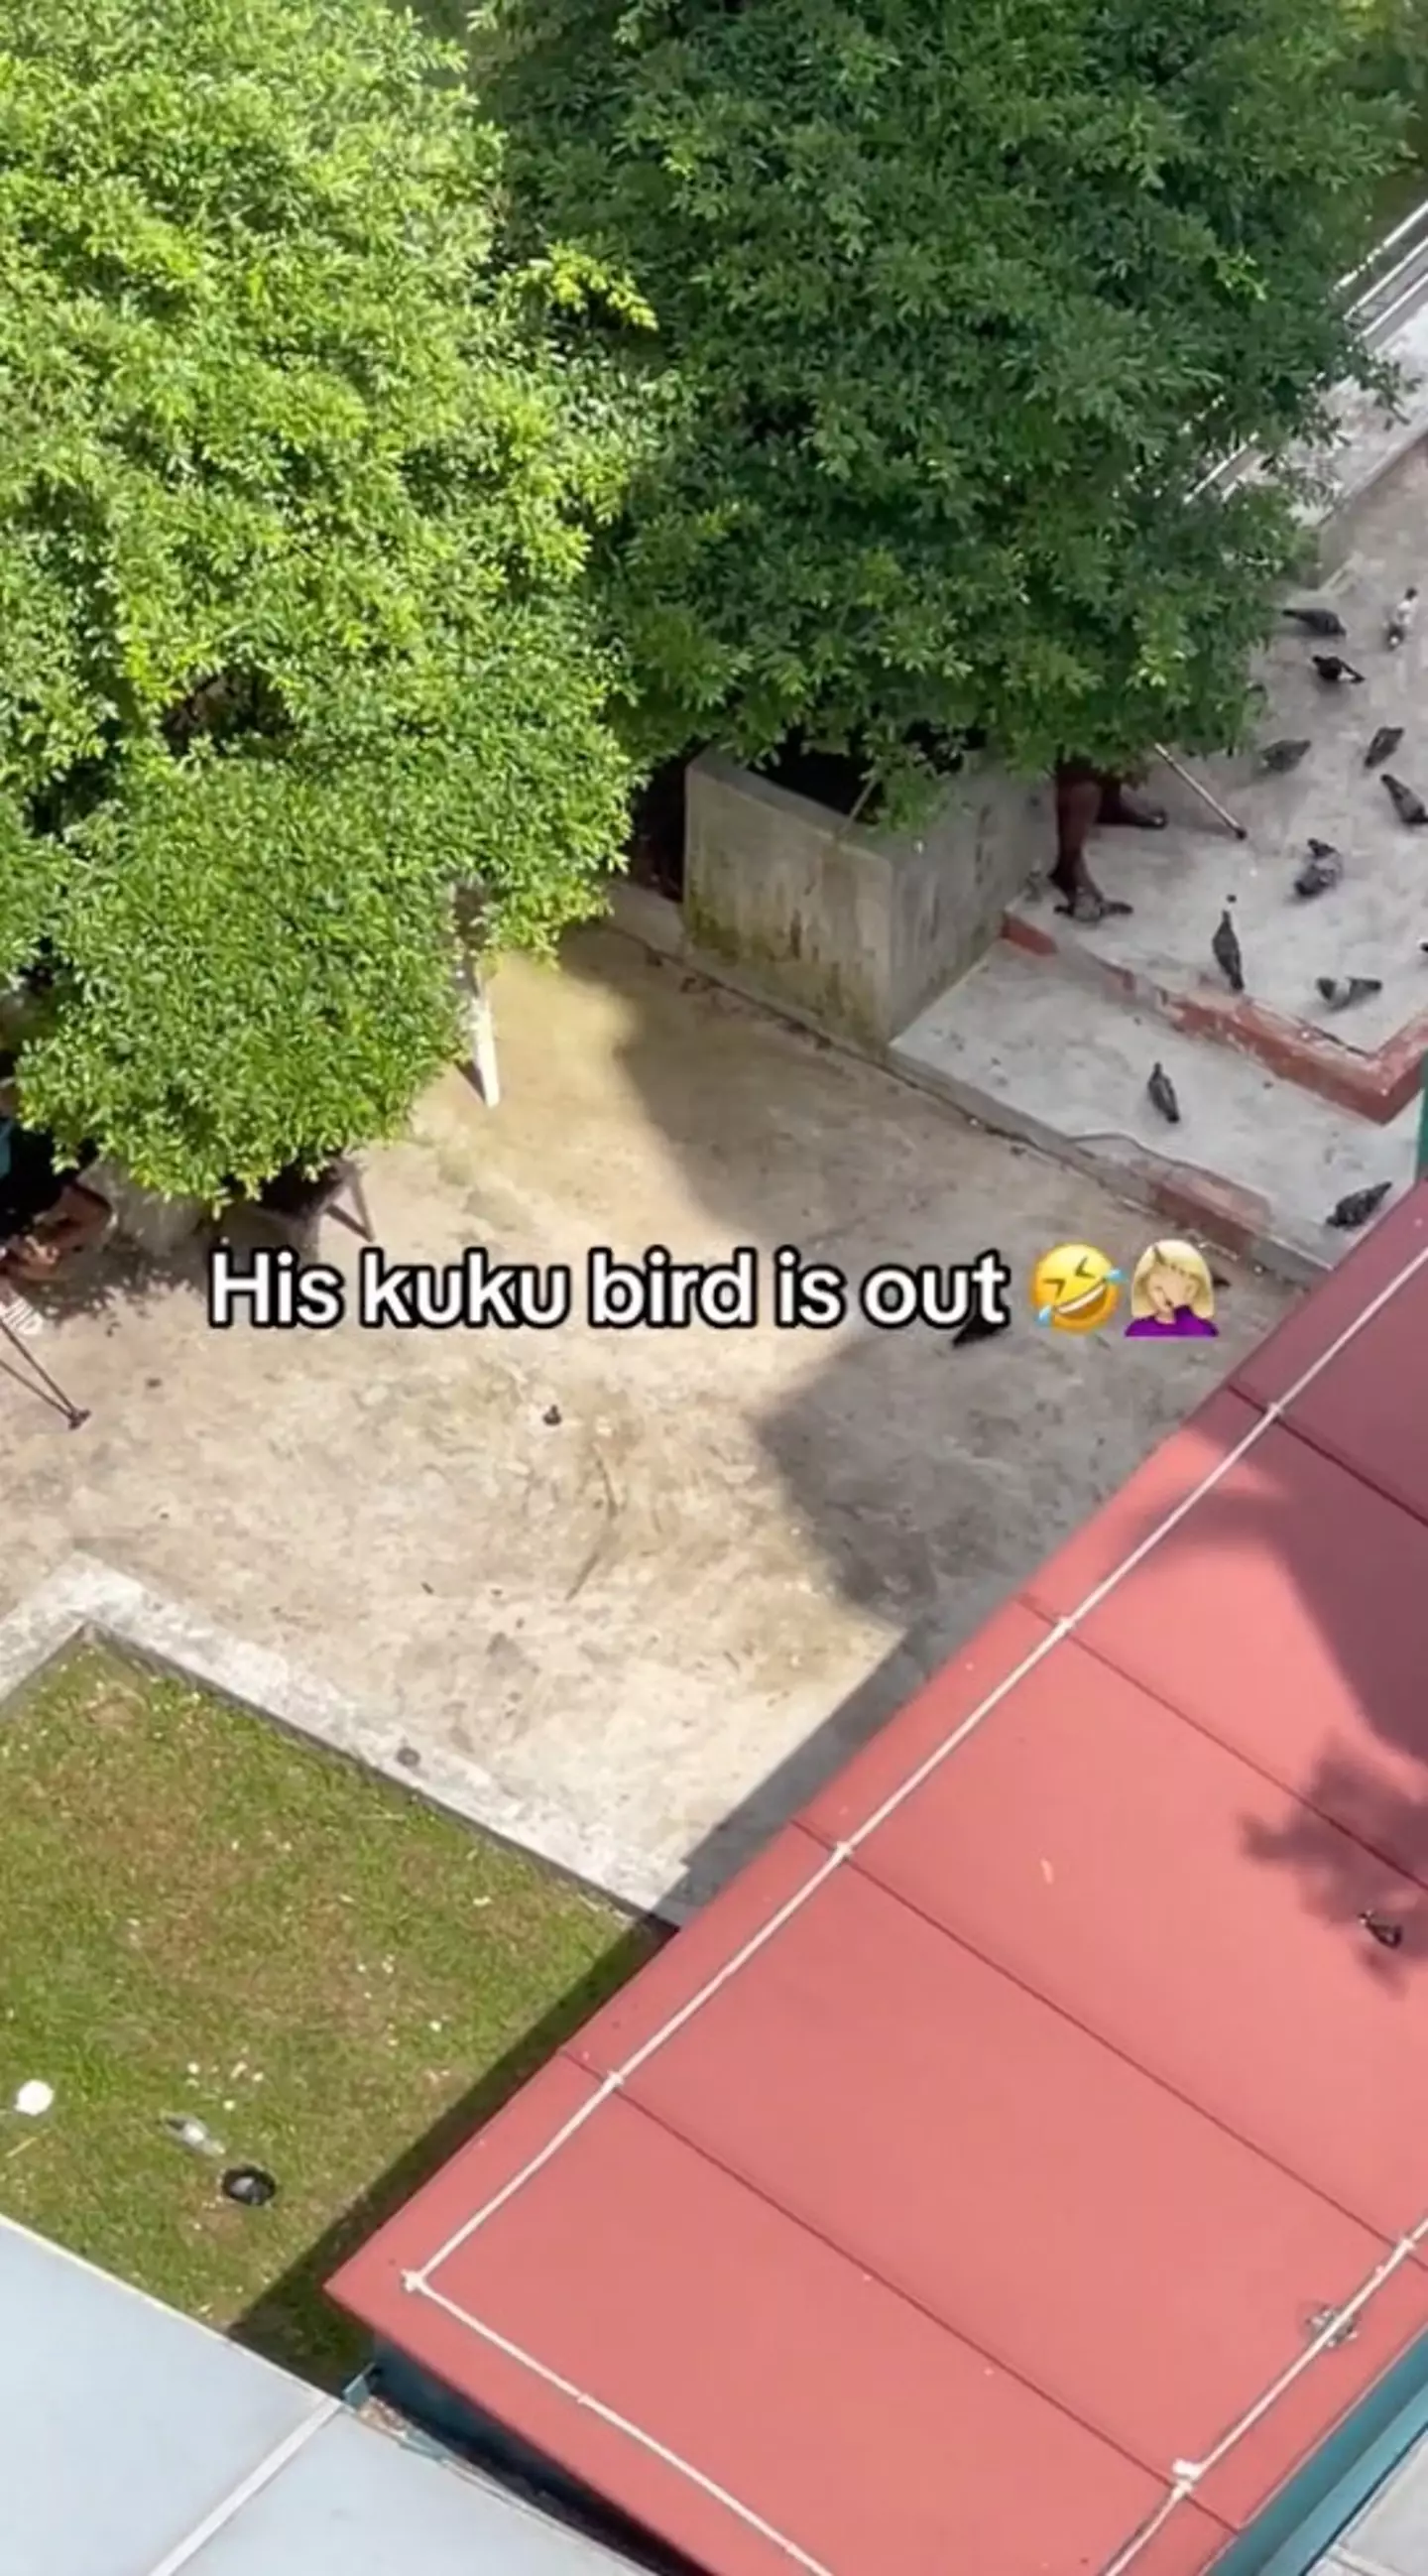 A Singapore mum was forced to call the police after her son spotted a man exposing himself to a flock of birds.